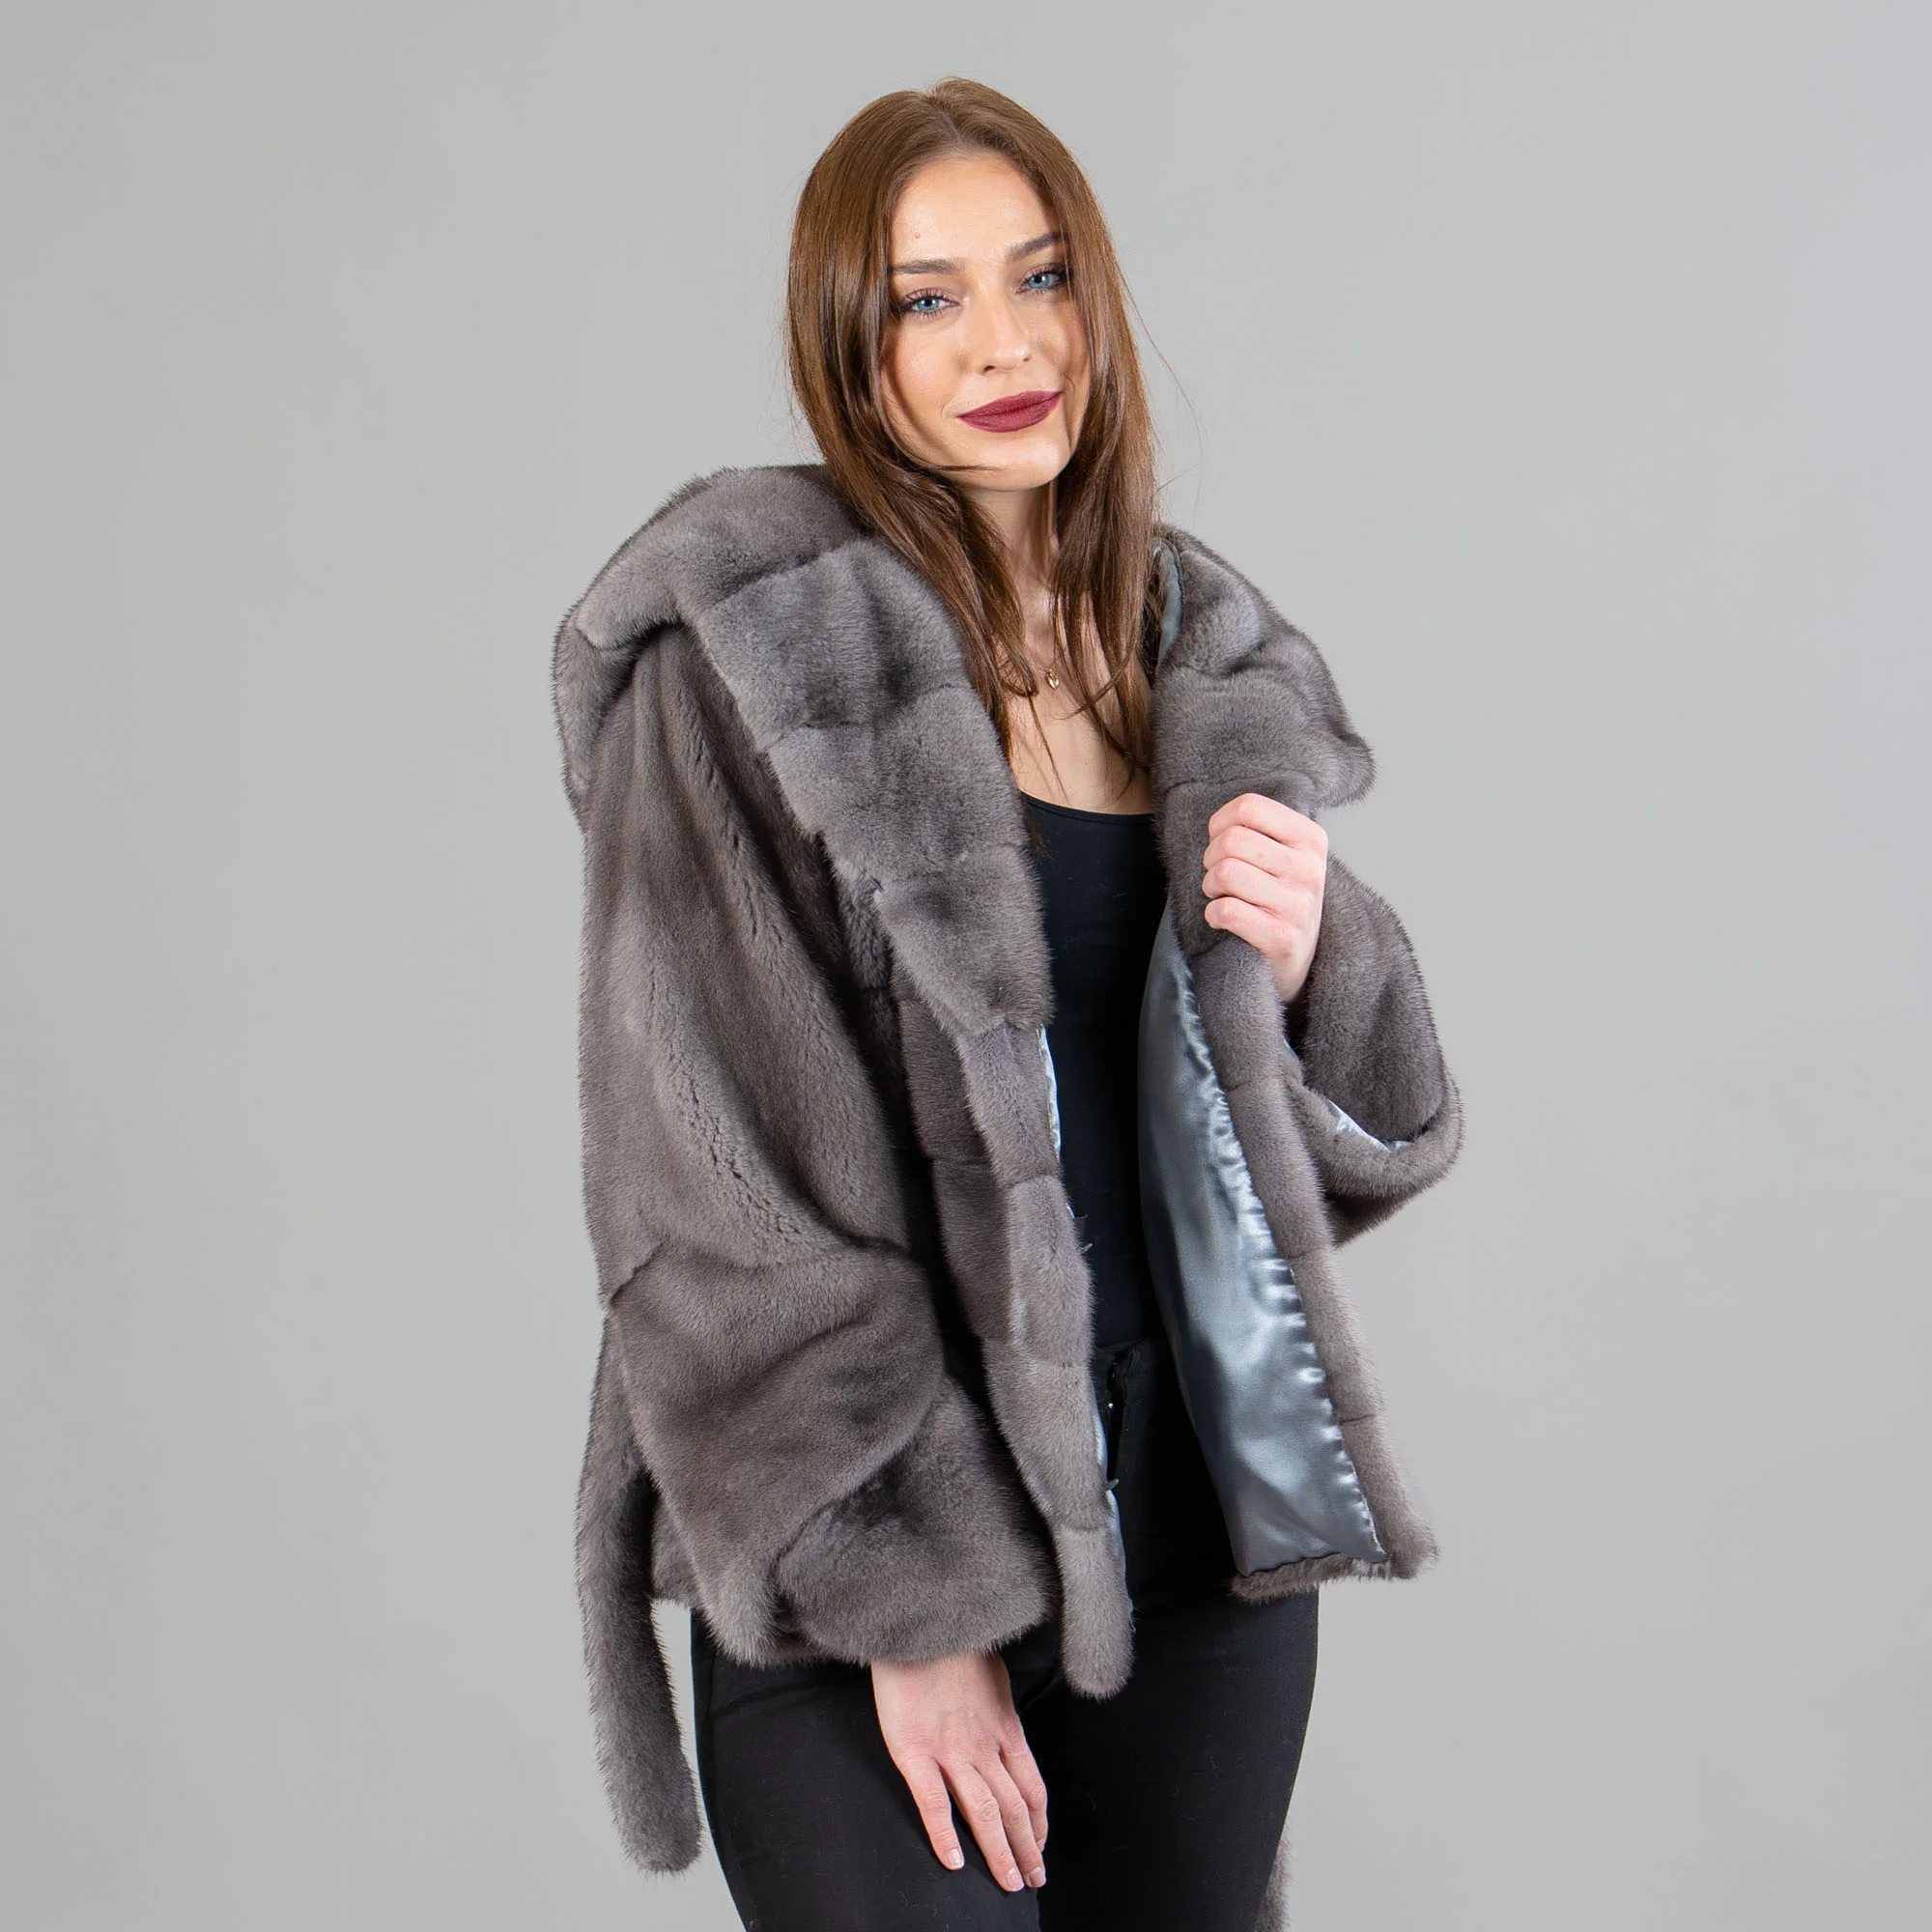 Dark gray mink fur jacket with a hood and belt